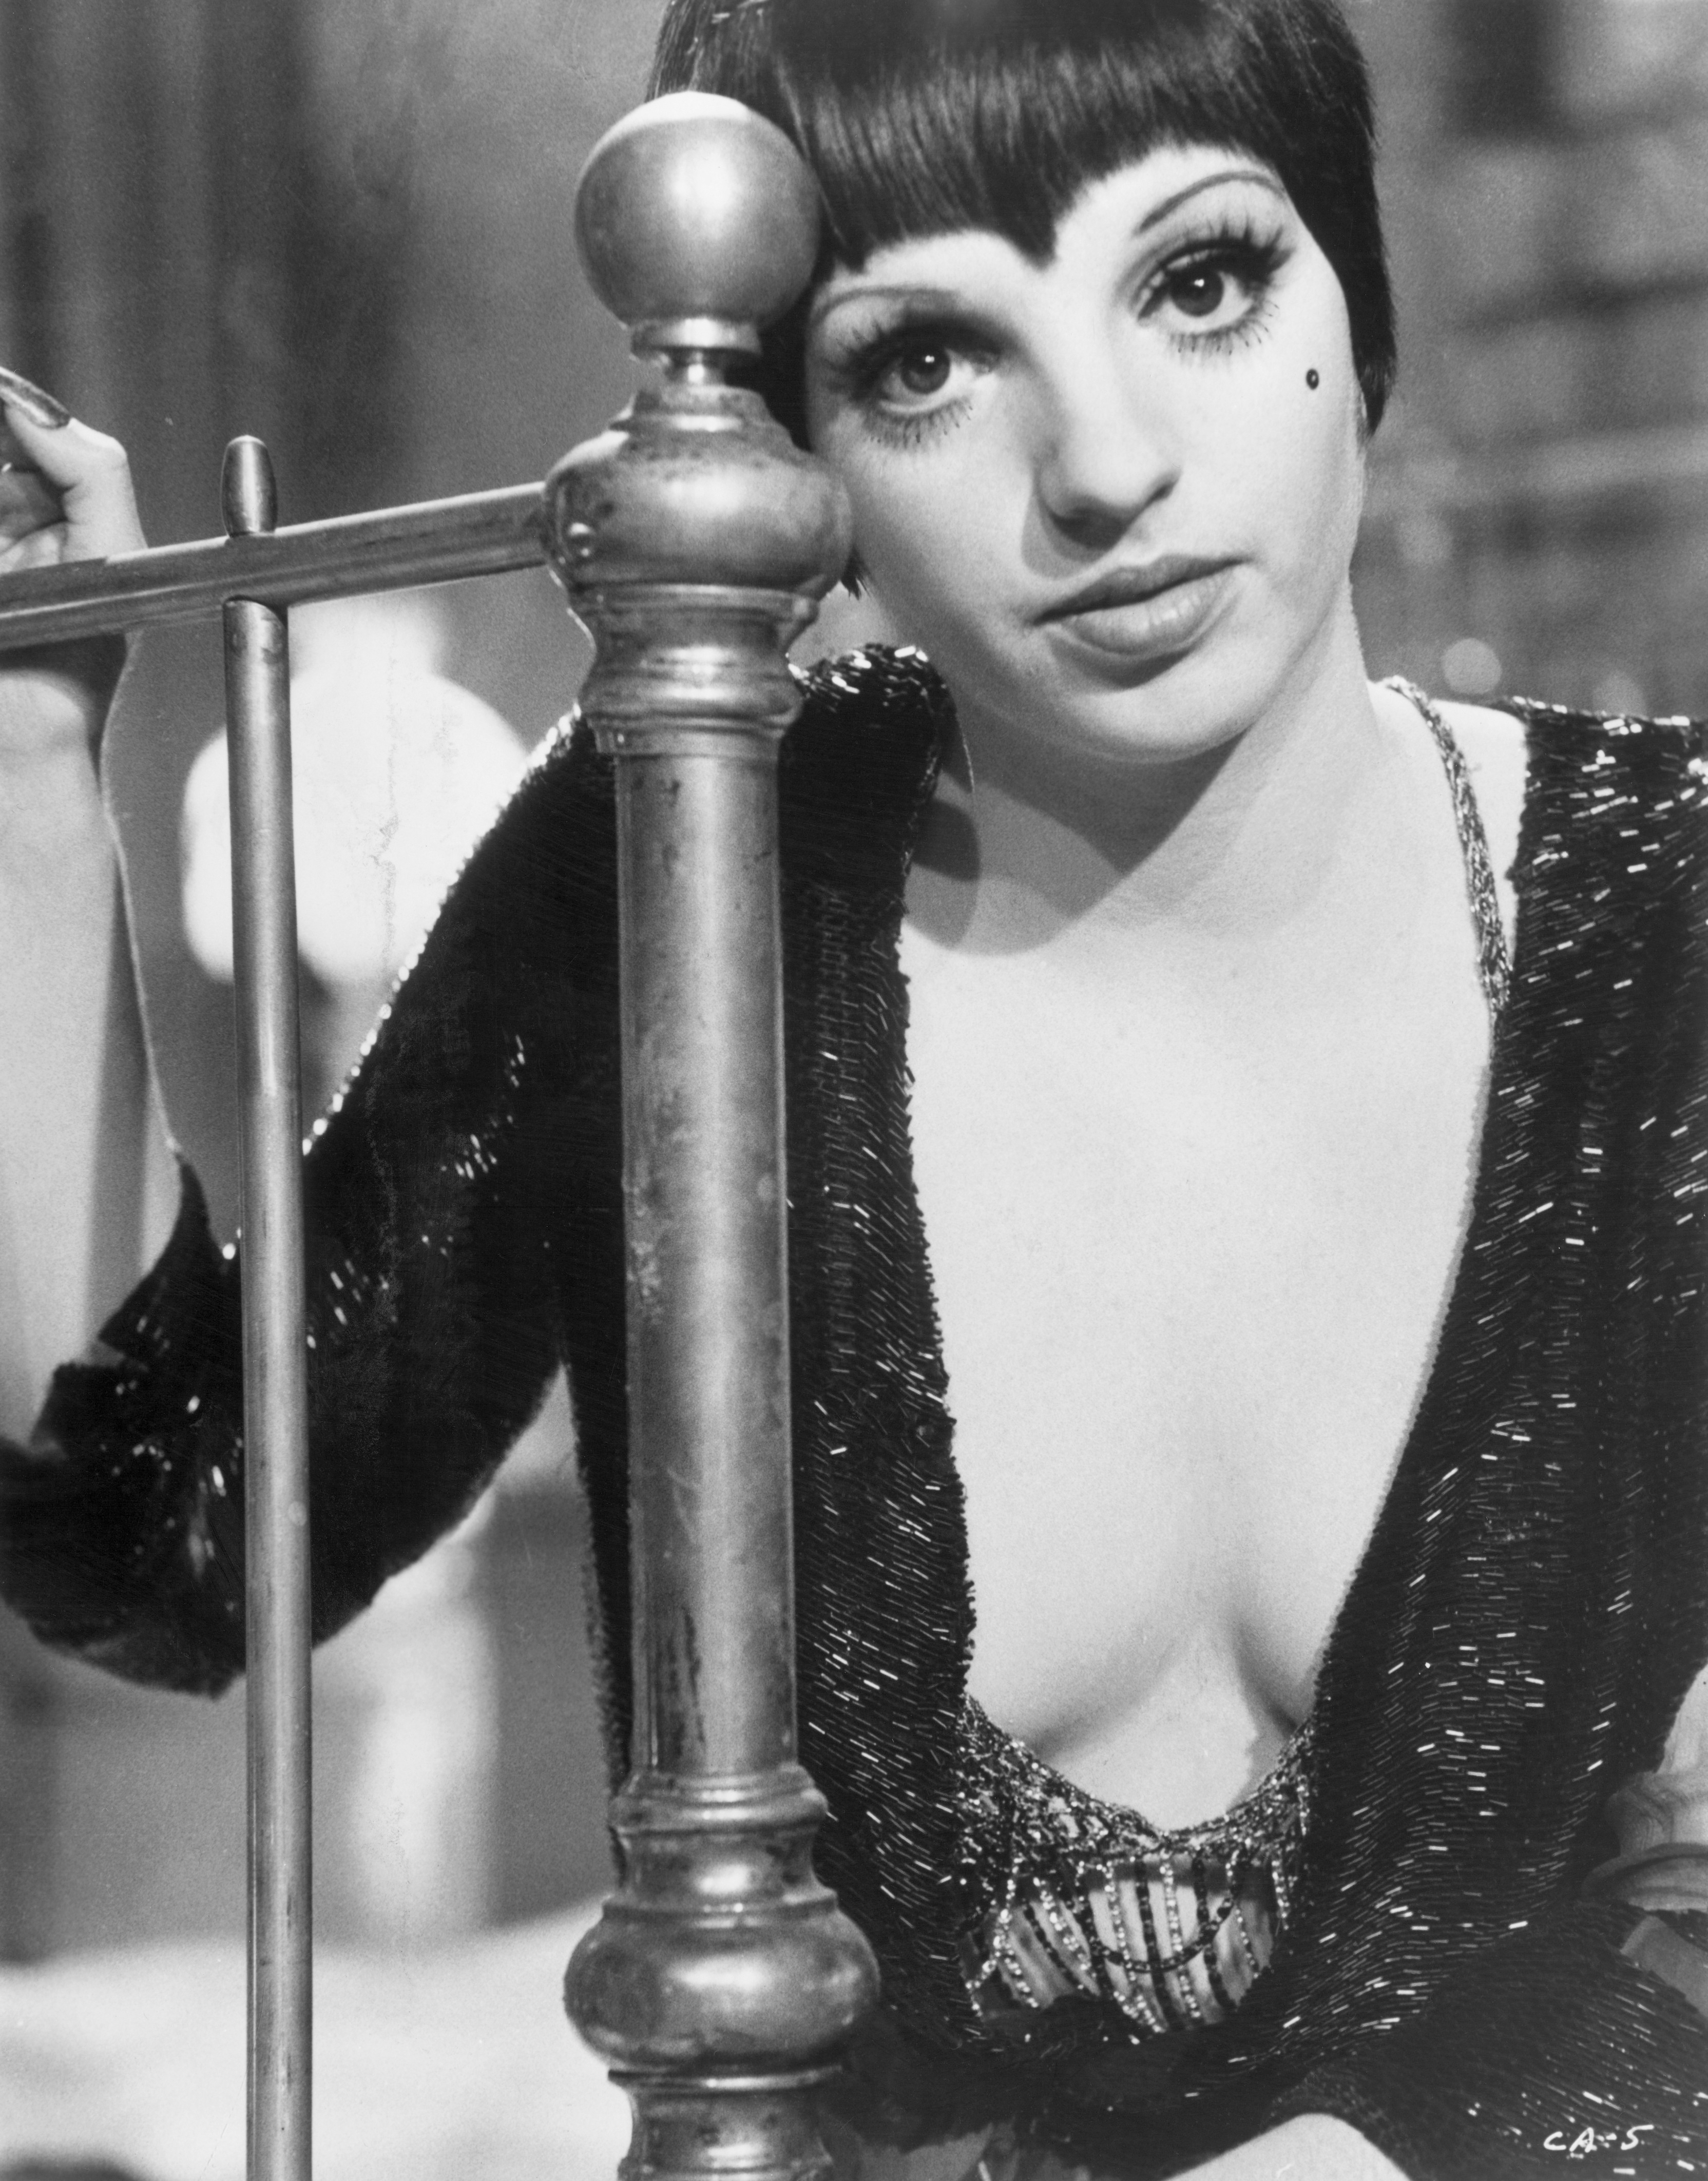 Liza Minnelli as Sally Bowles in the 1972 film "Cabaret" directed by Bob Fosse. | Source: Getty Images